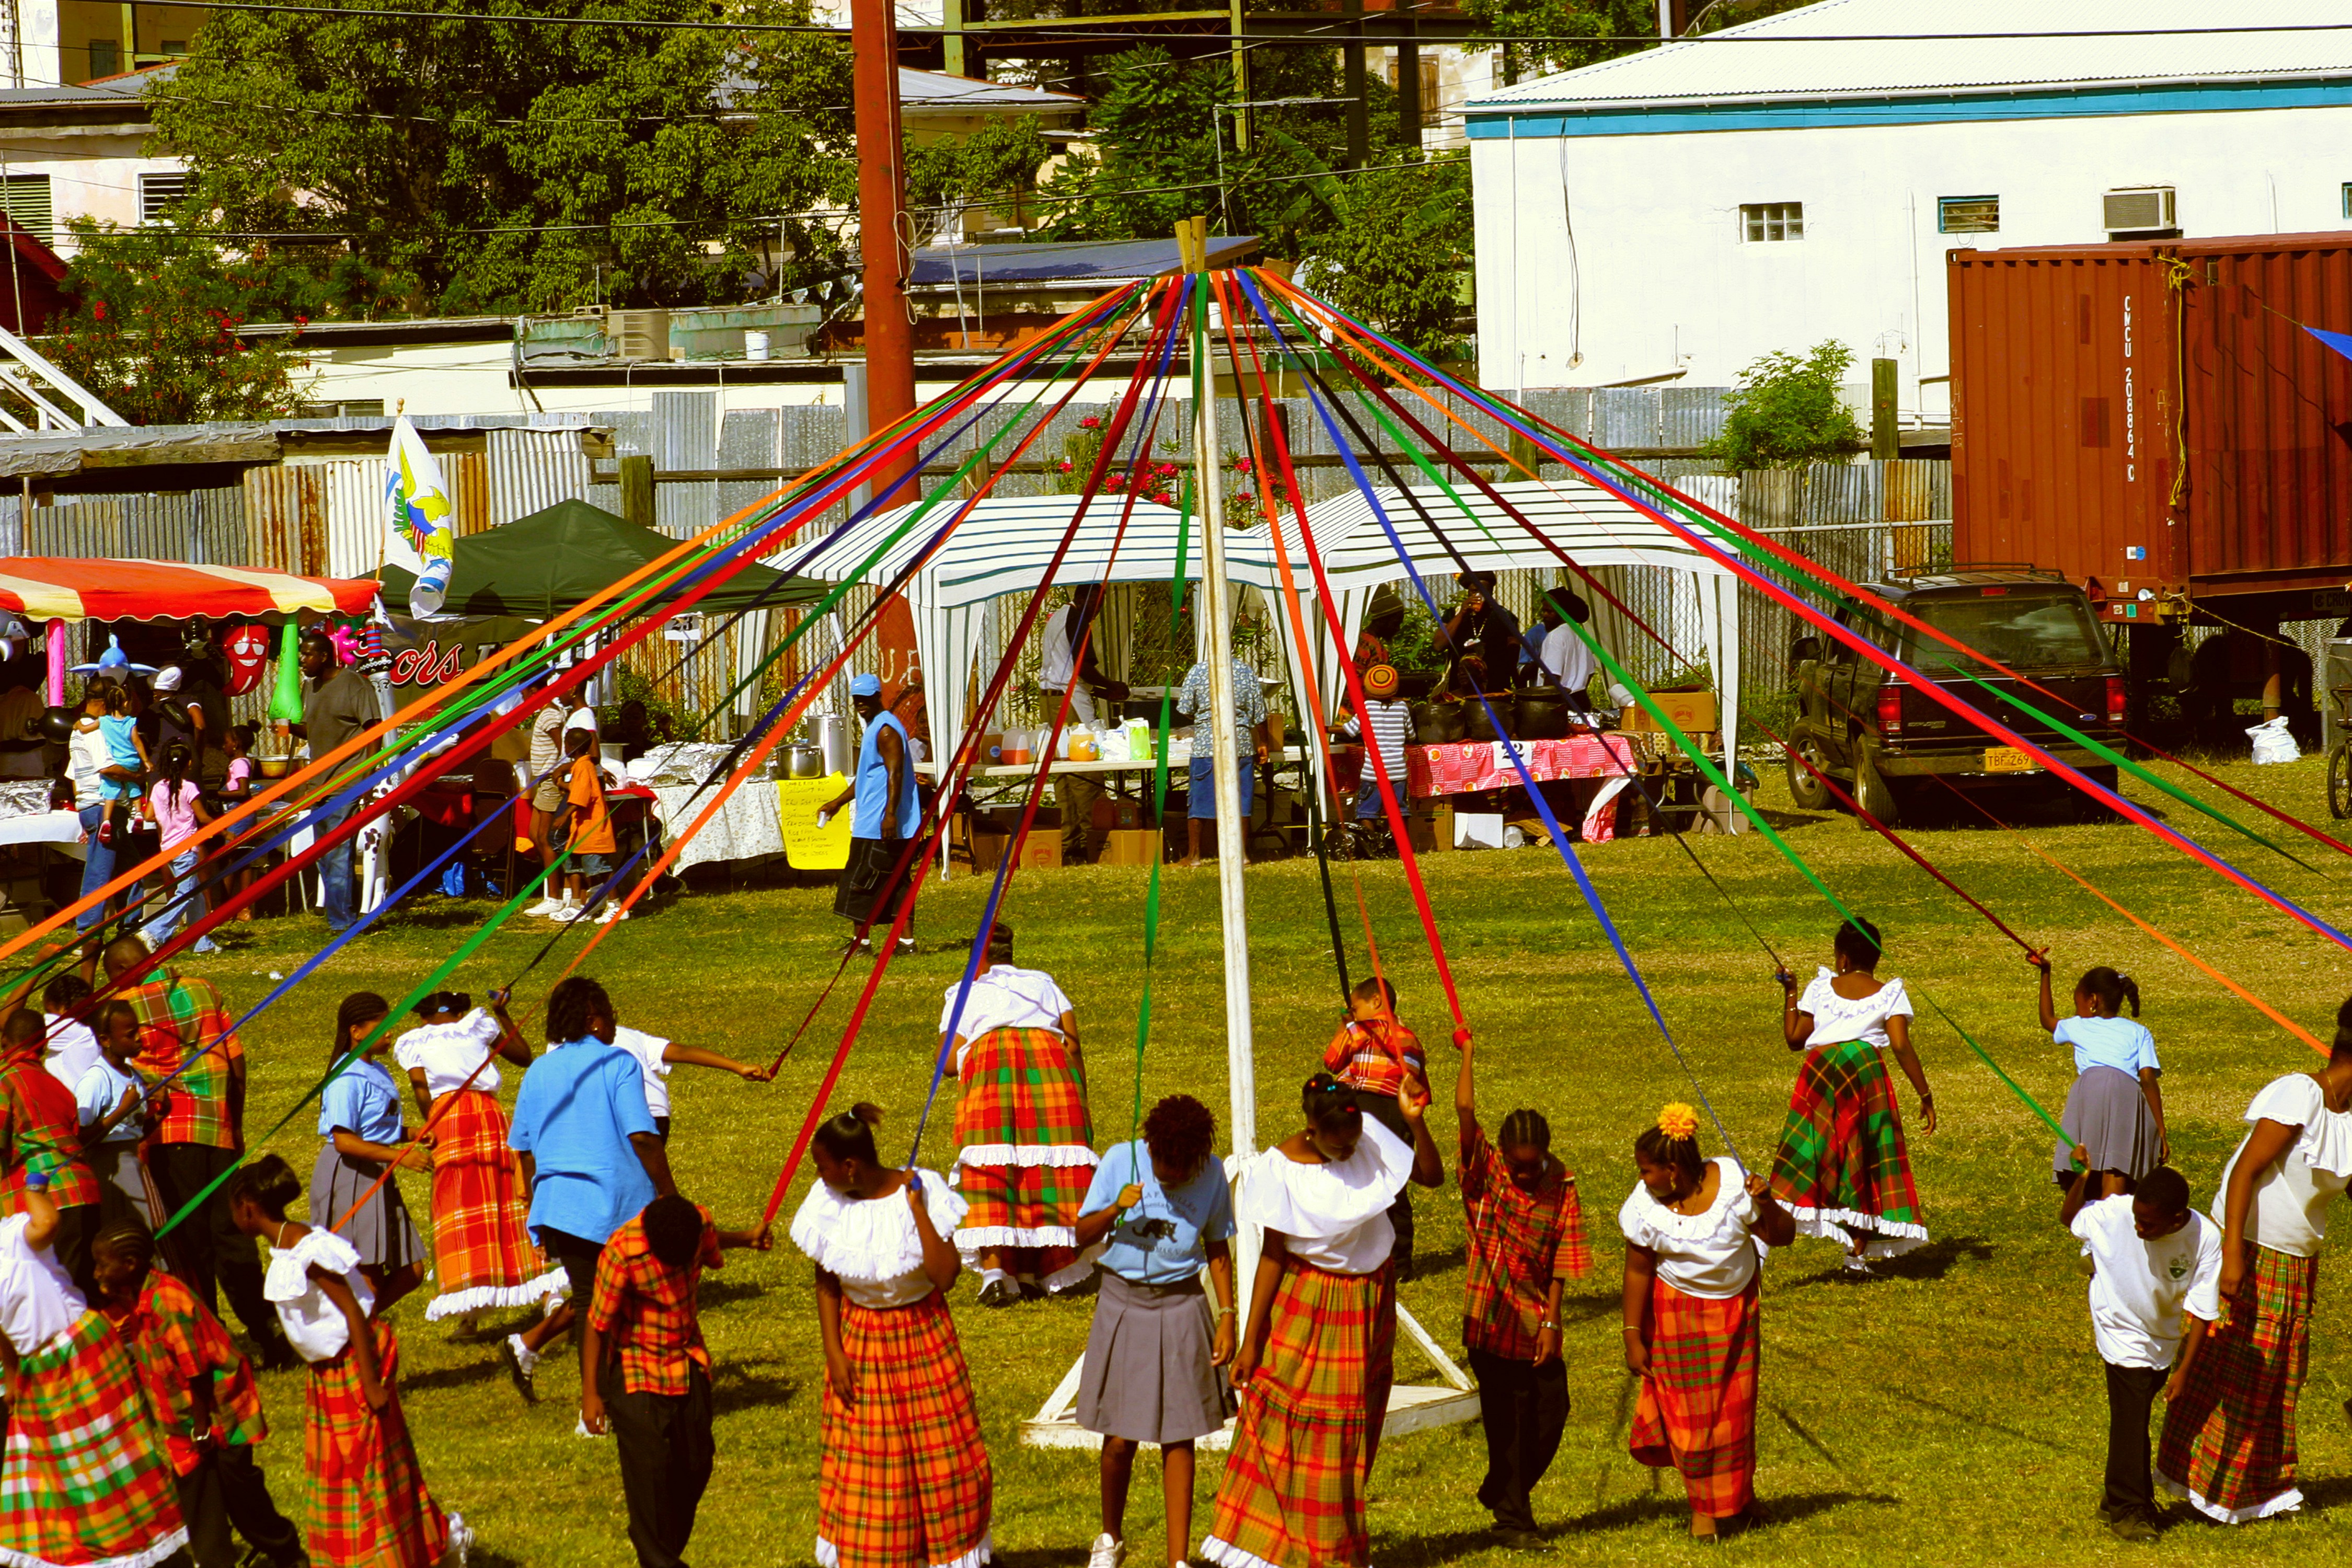 A group of people dancing in a May Pole ceremony.